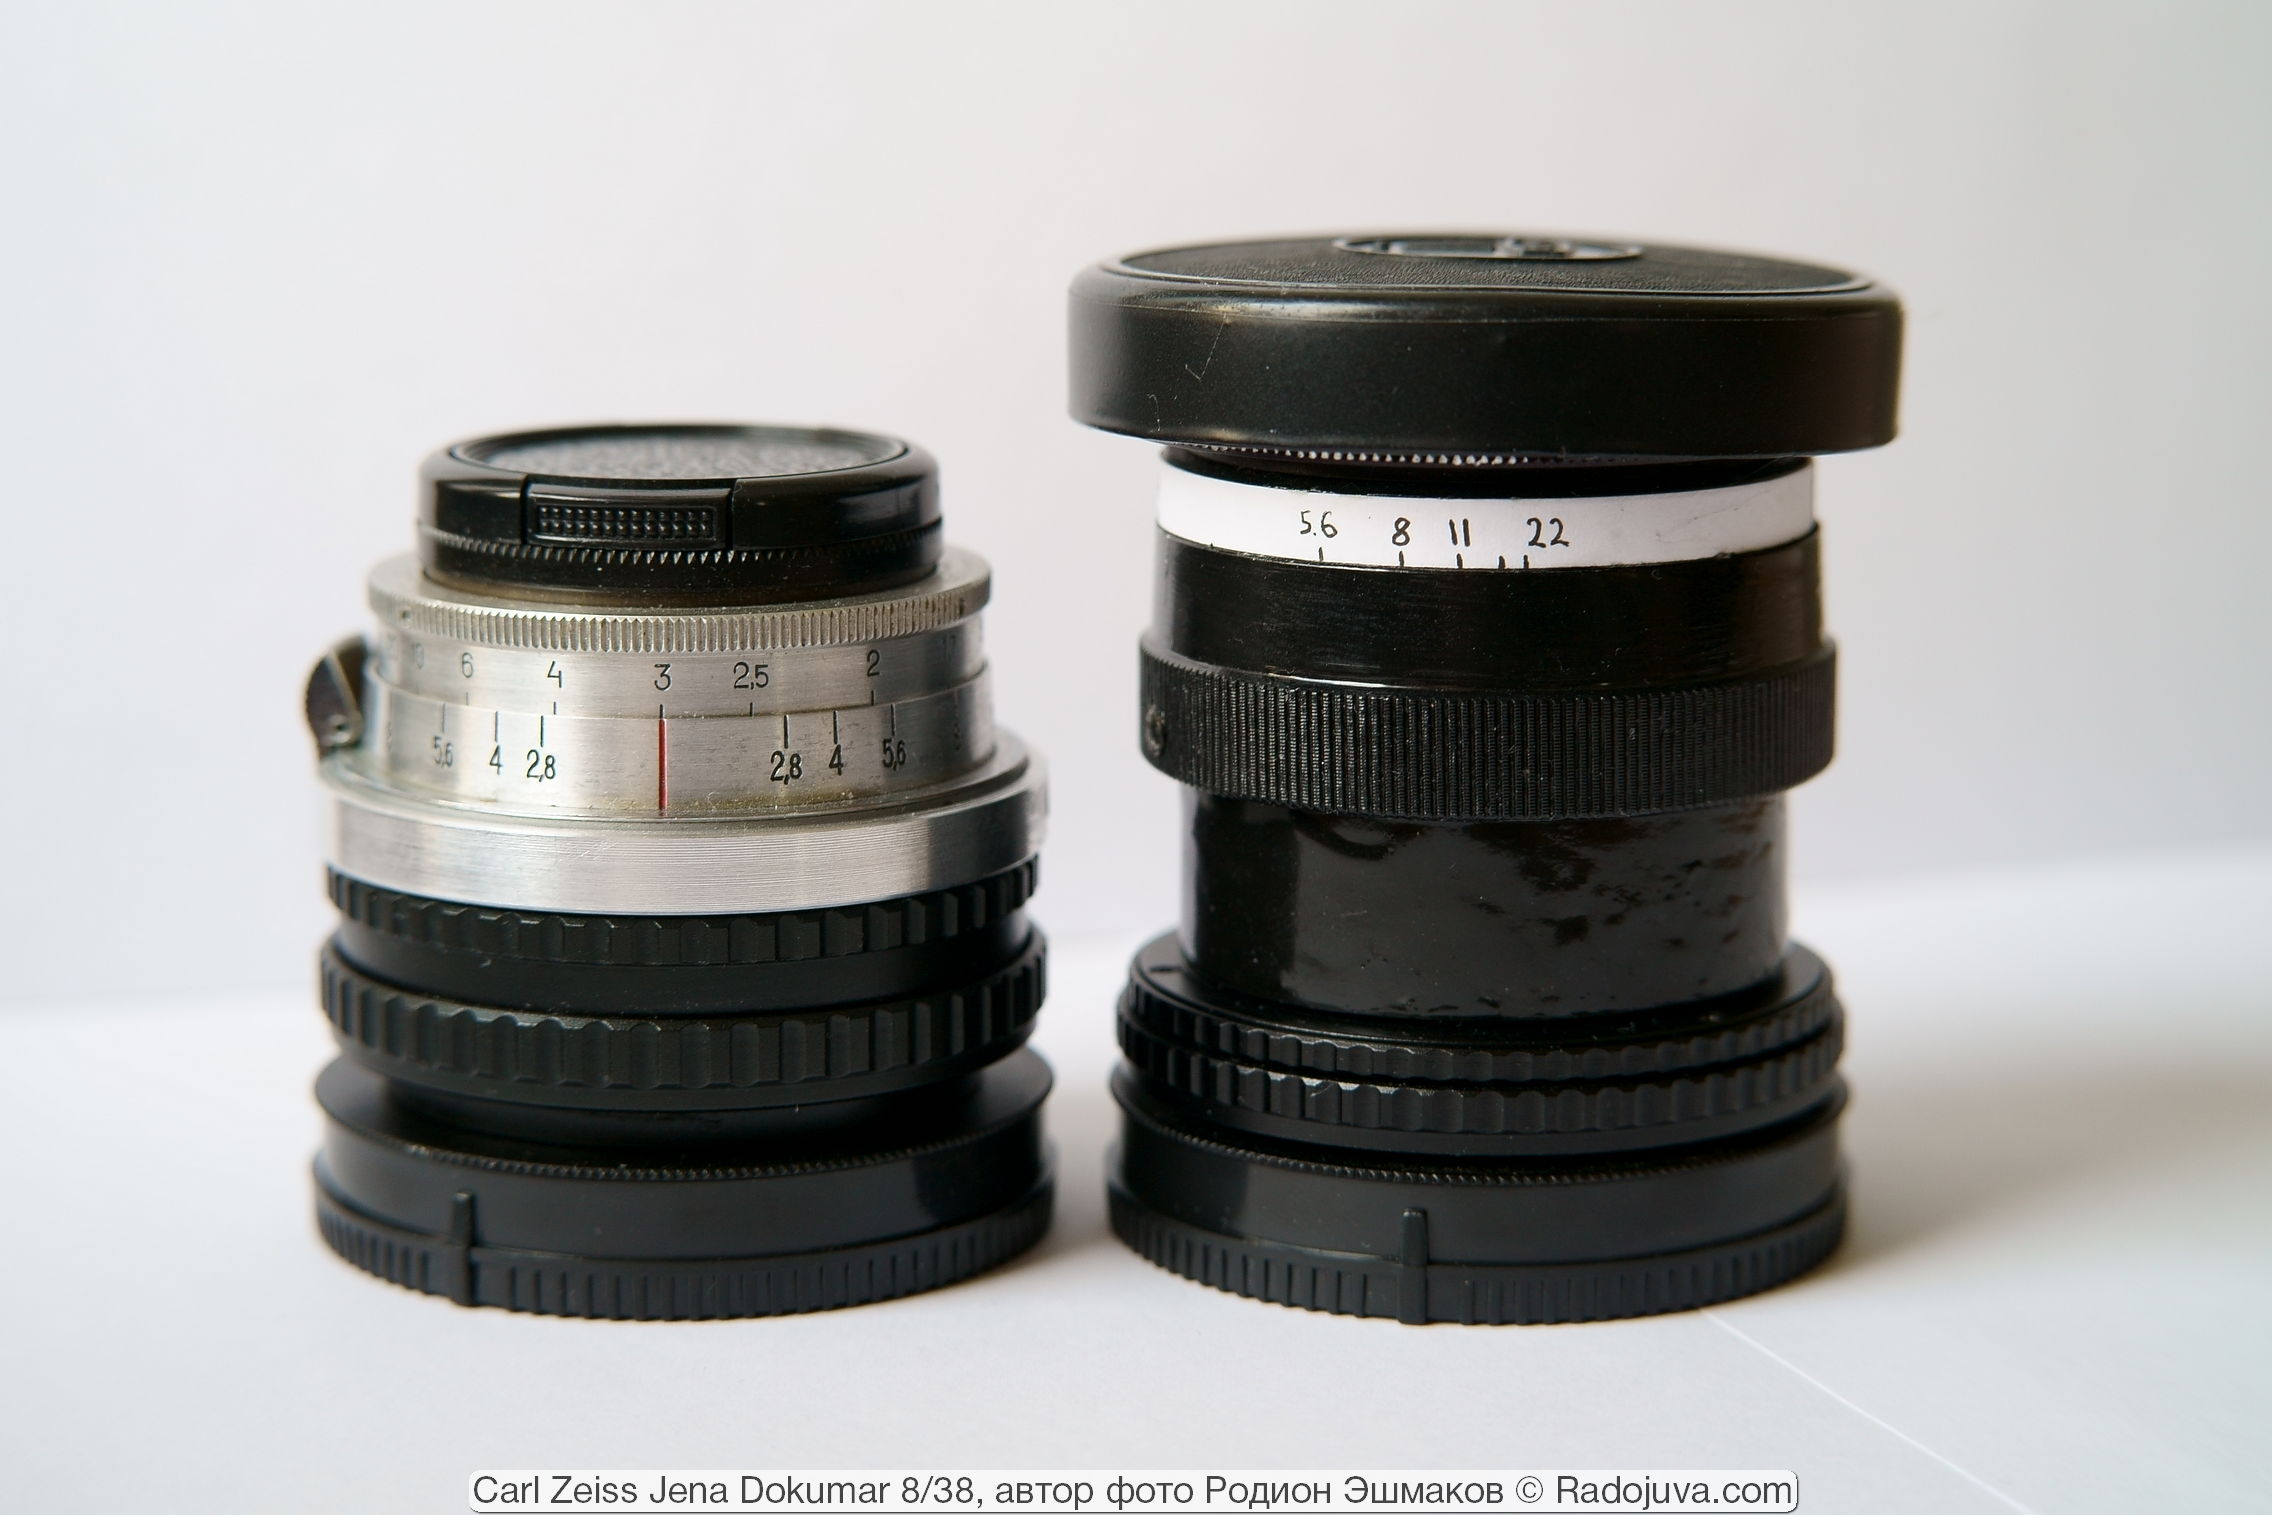 Reproduction Carl Zeiss Jena Dokumar 8/38, adapted for mirrorless 